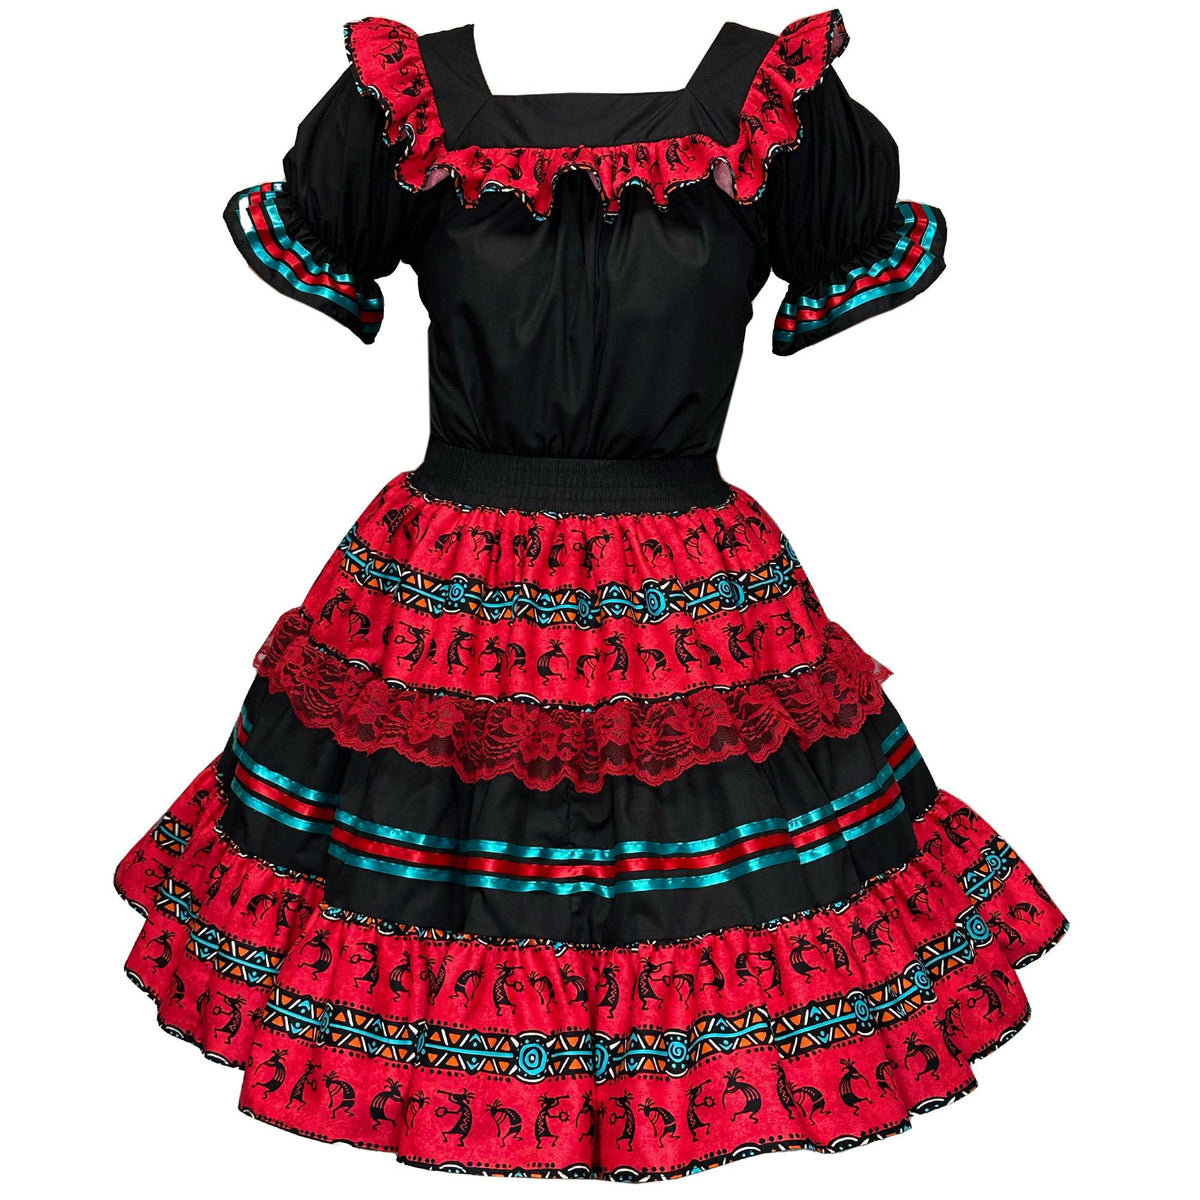 A women&#39;s Kokopelli Square Dance Outfit with red and black ruffles and a square dance skirt from Square Up Fashions.